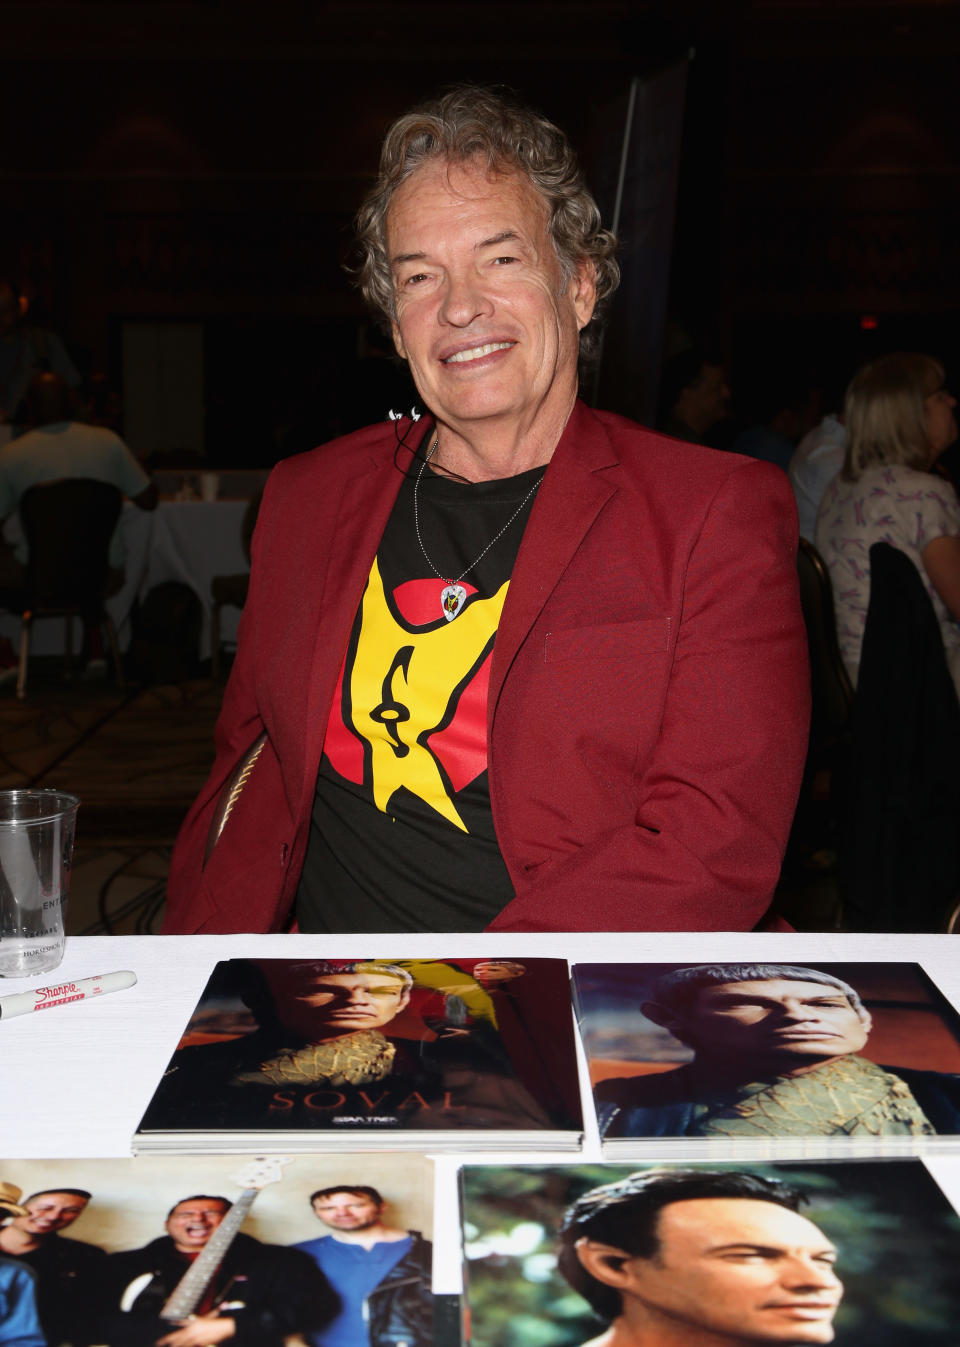 Graham at 17th annual official Star Trek convention in Las Vegas (2018)